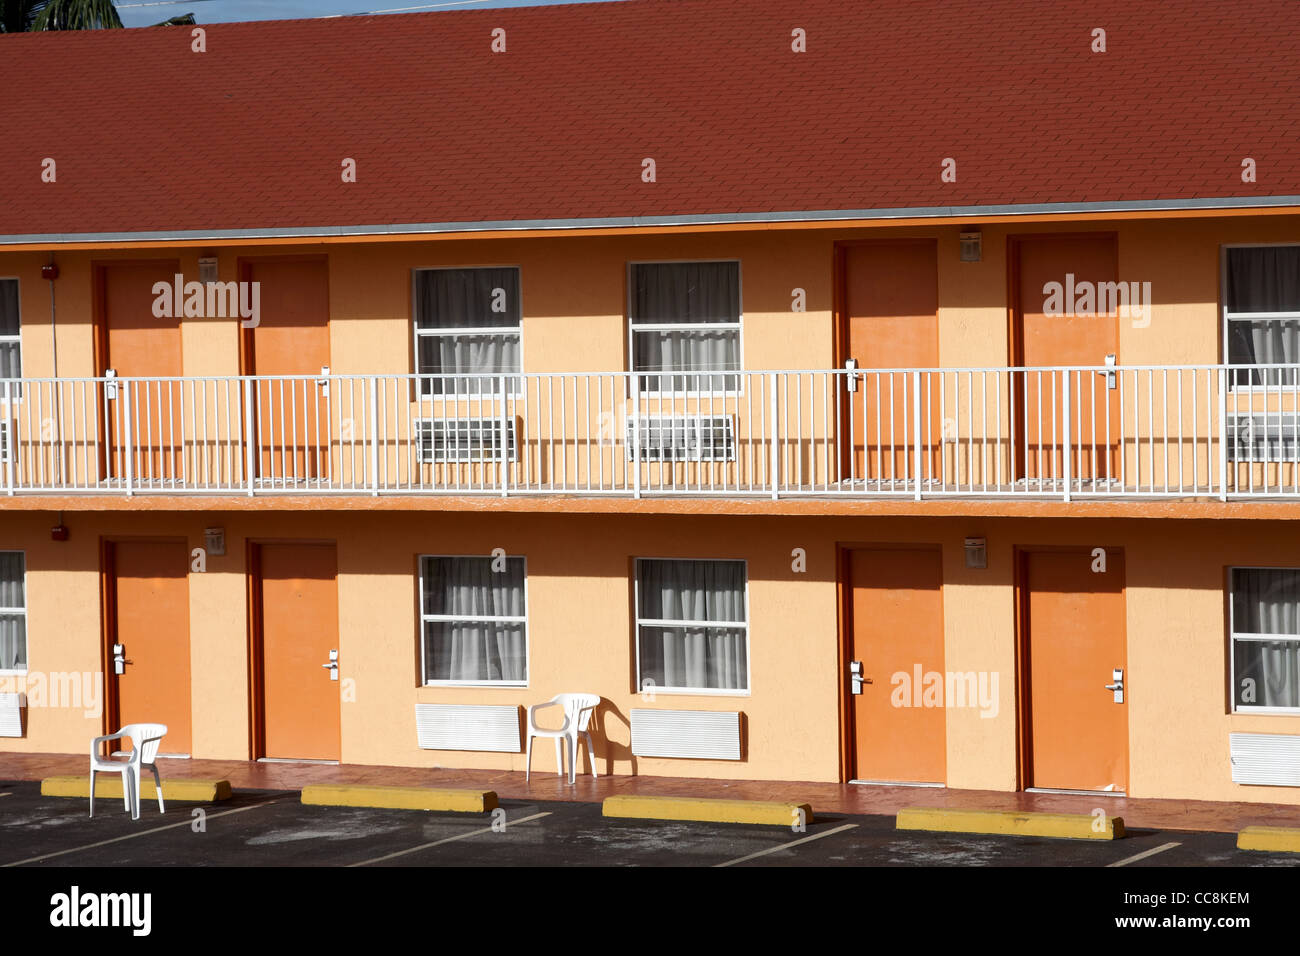 A Typical American Motel in Florida Stock Photo